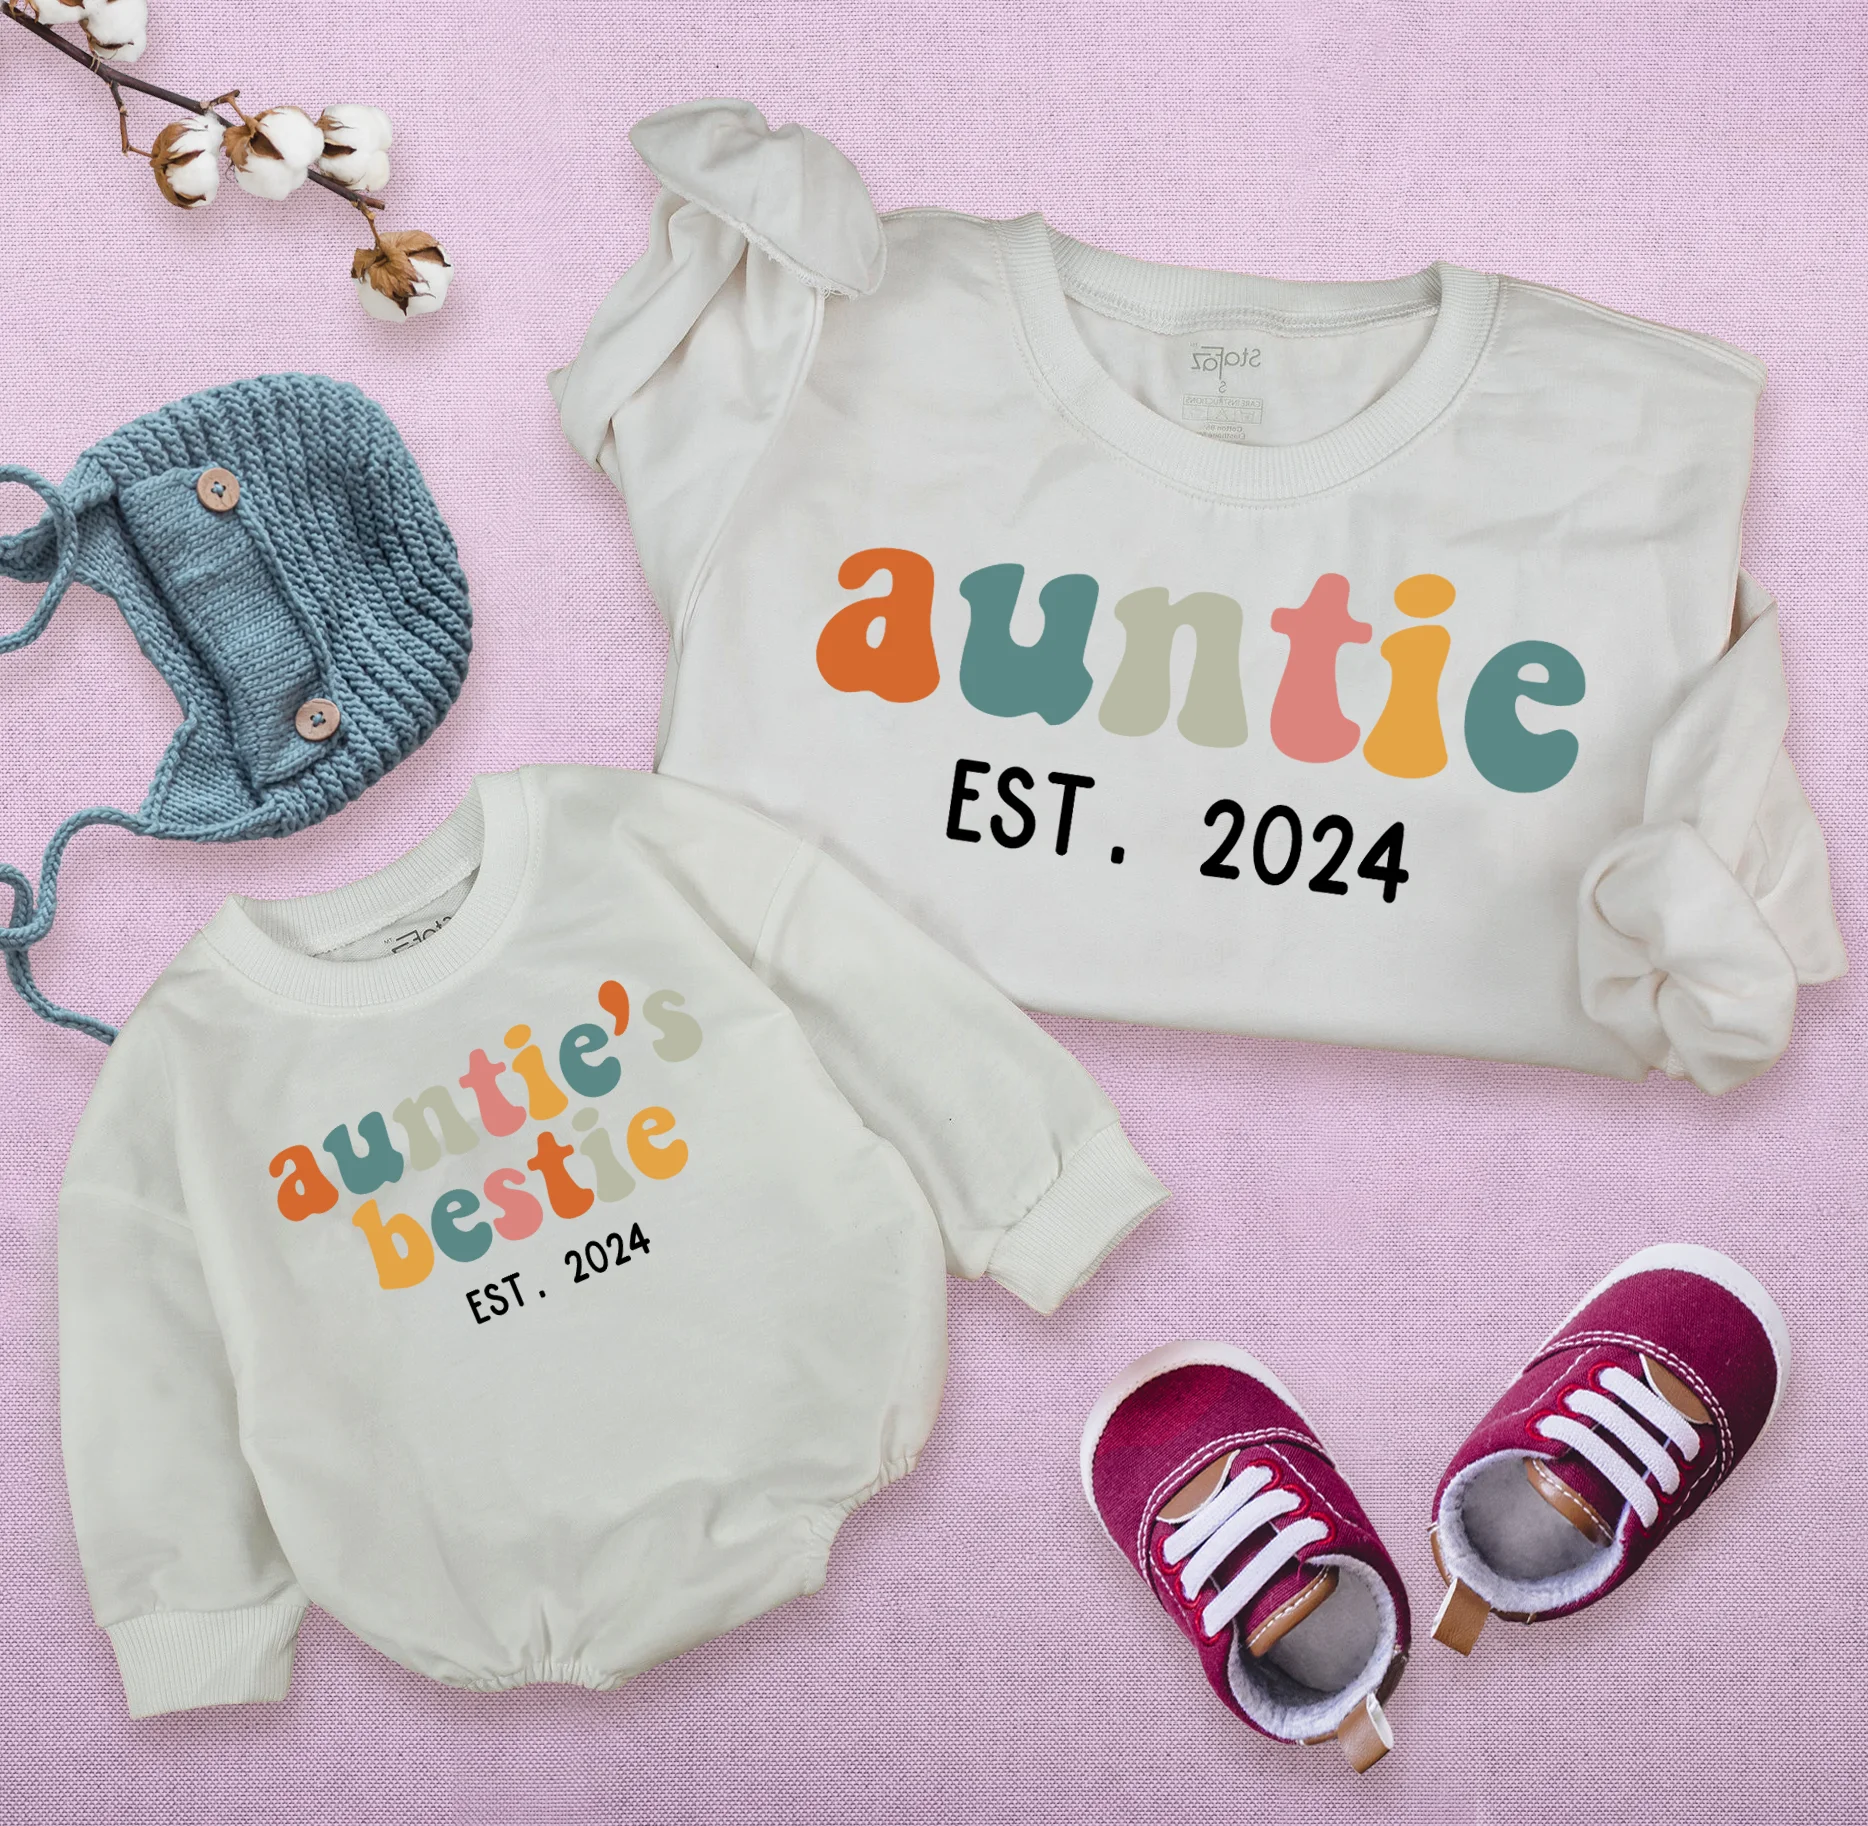 Auntie And Bestie EST 2024 Romper Matching: Timeless Style